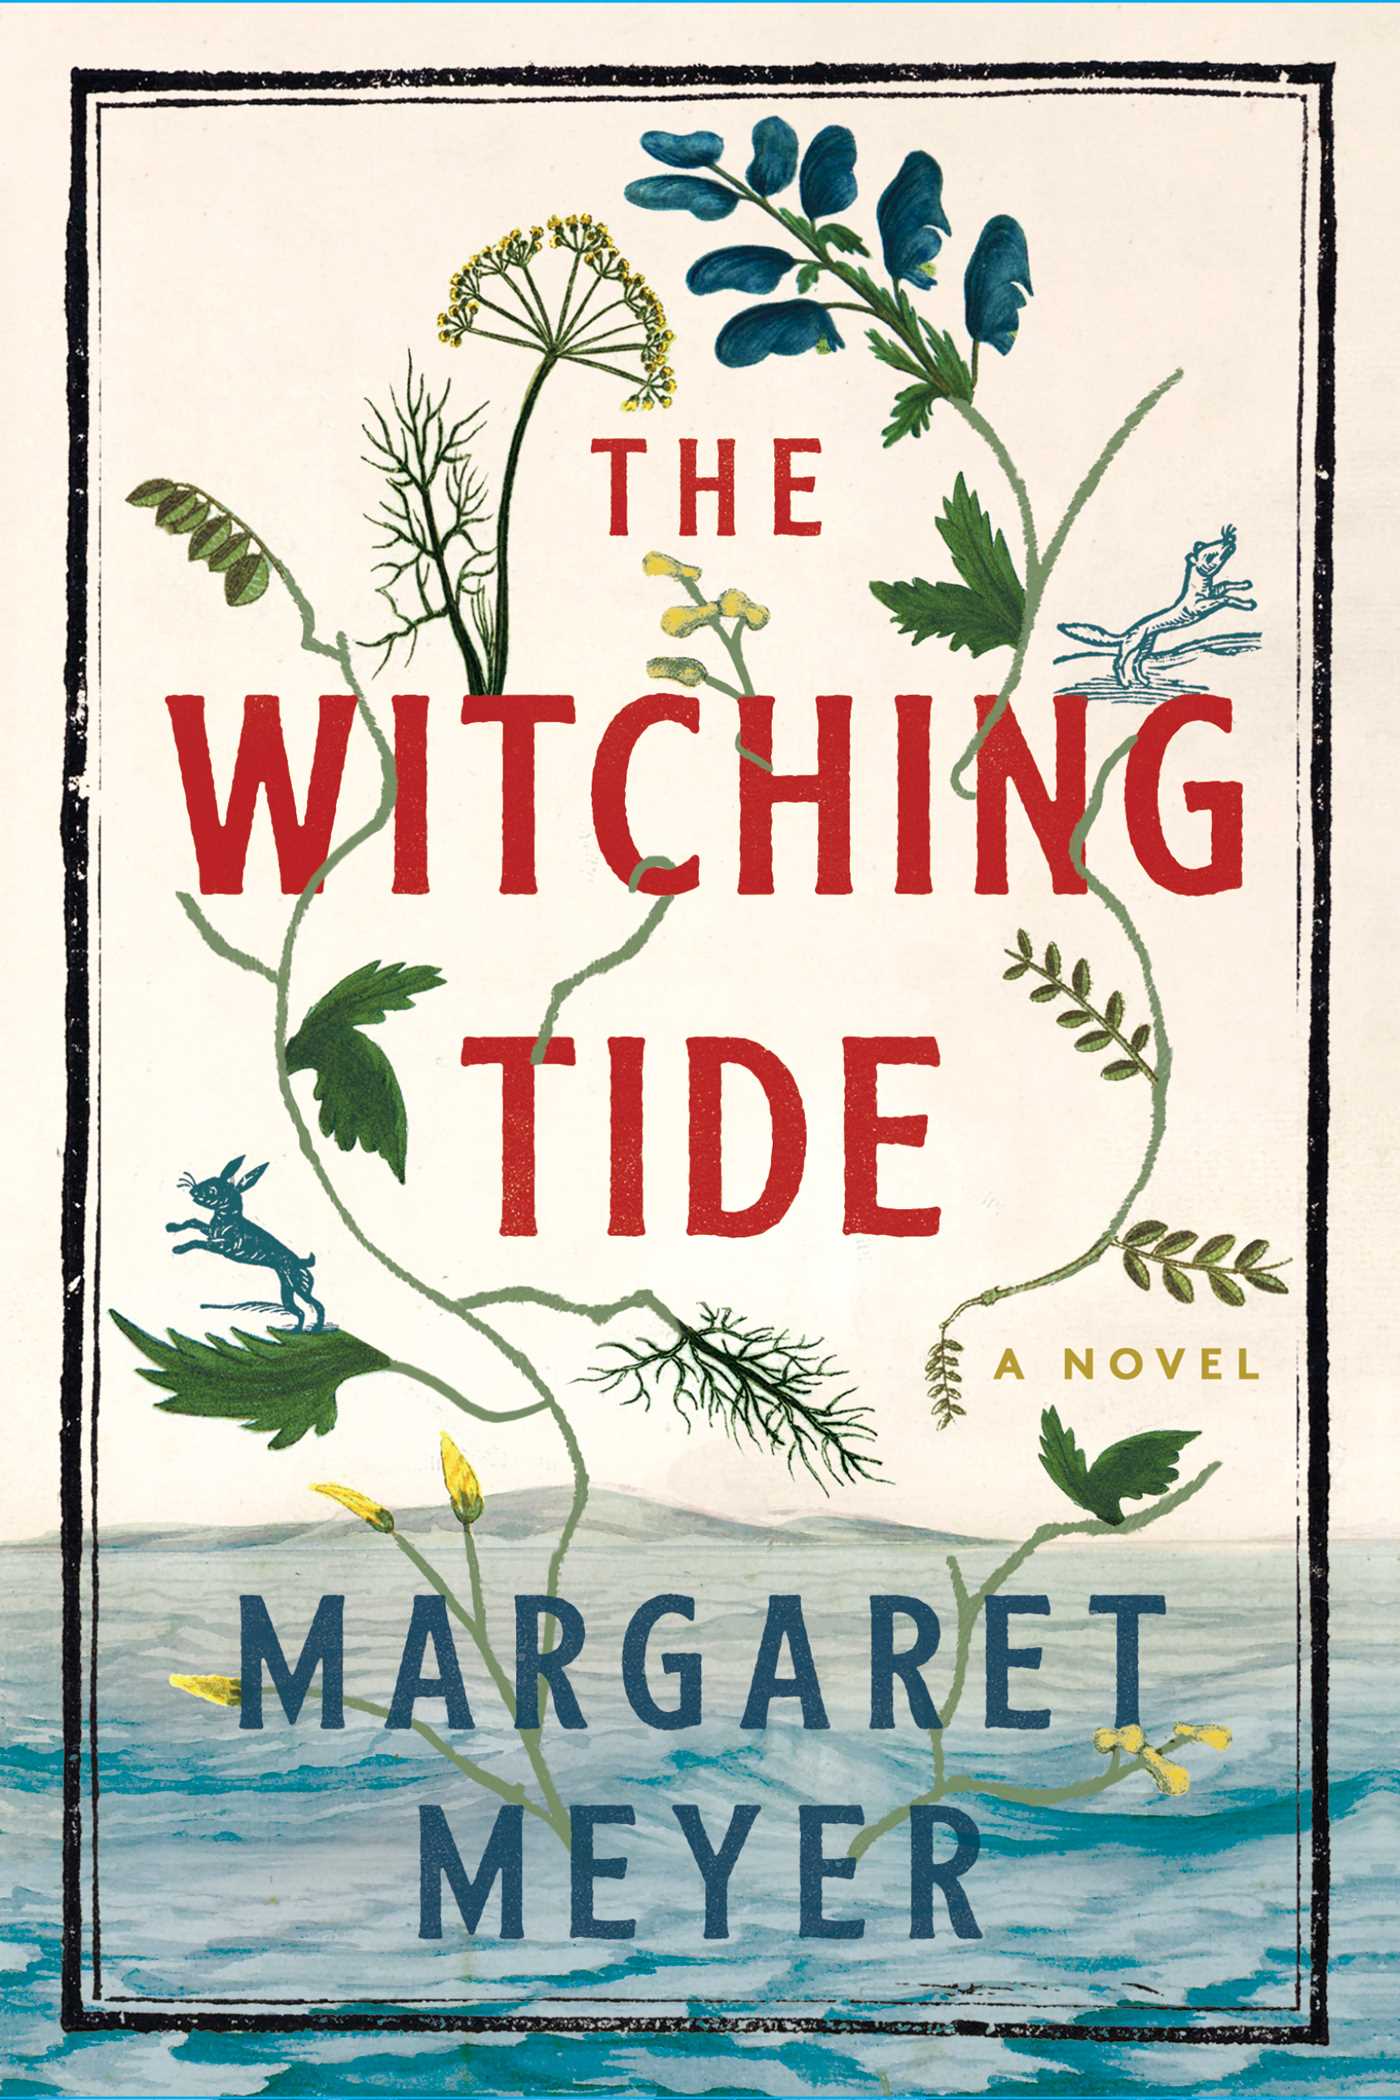 Image for "The Witching Tide"